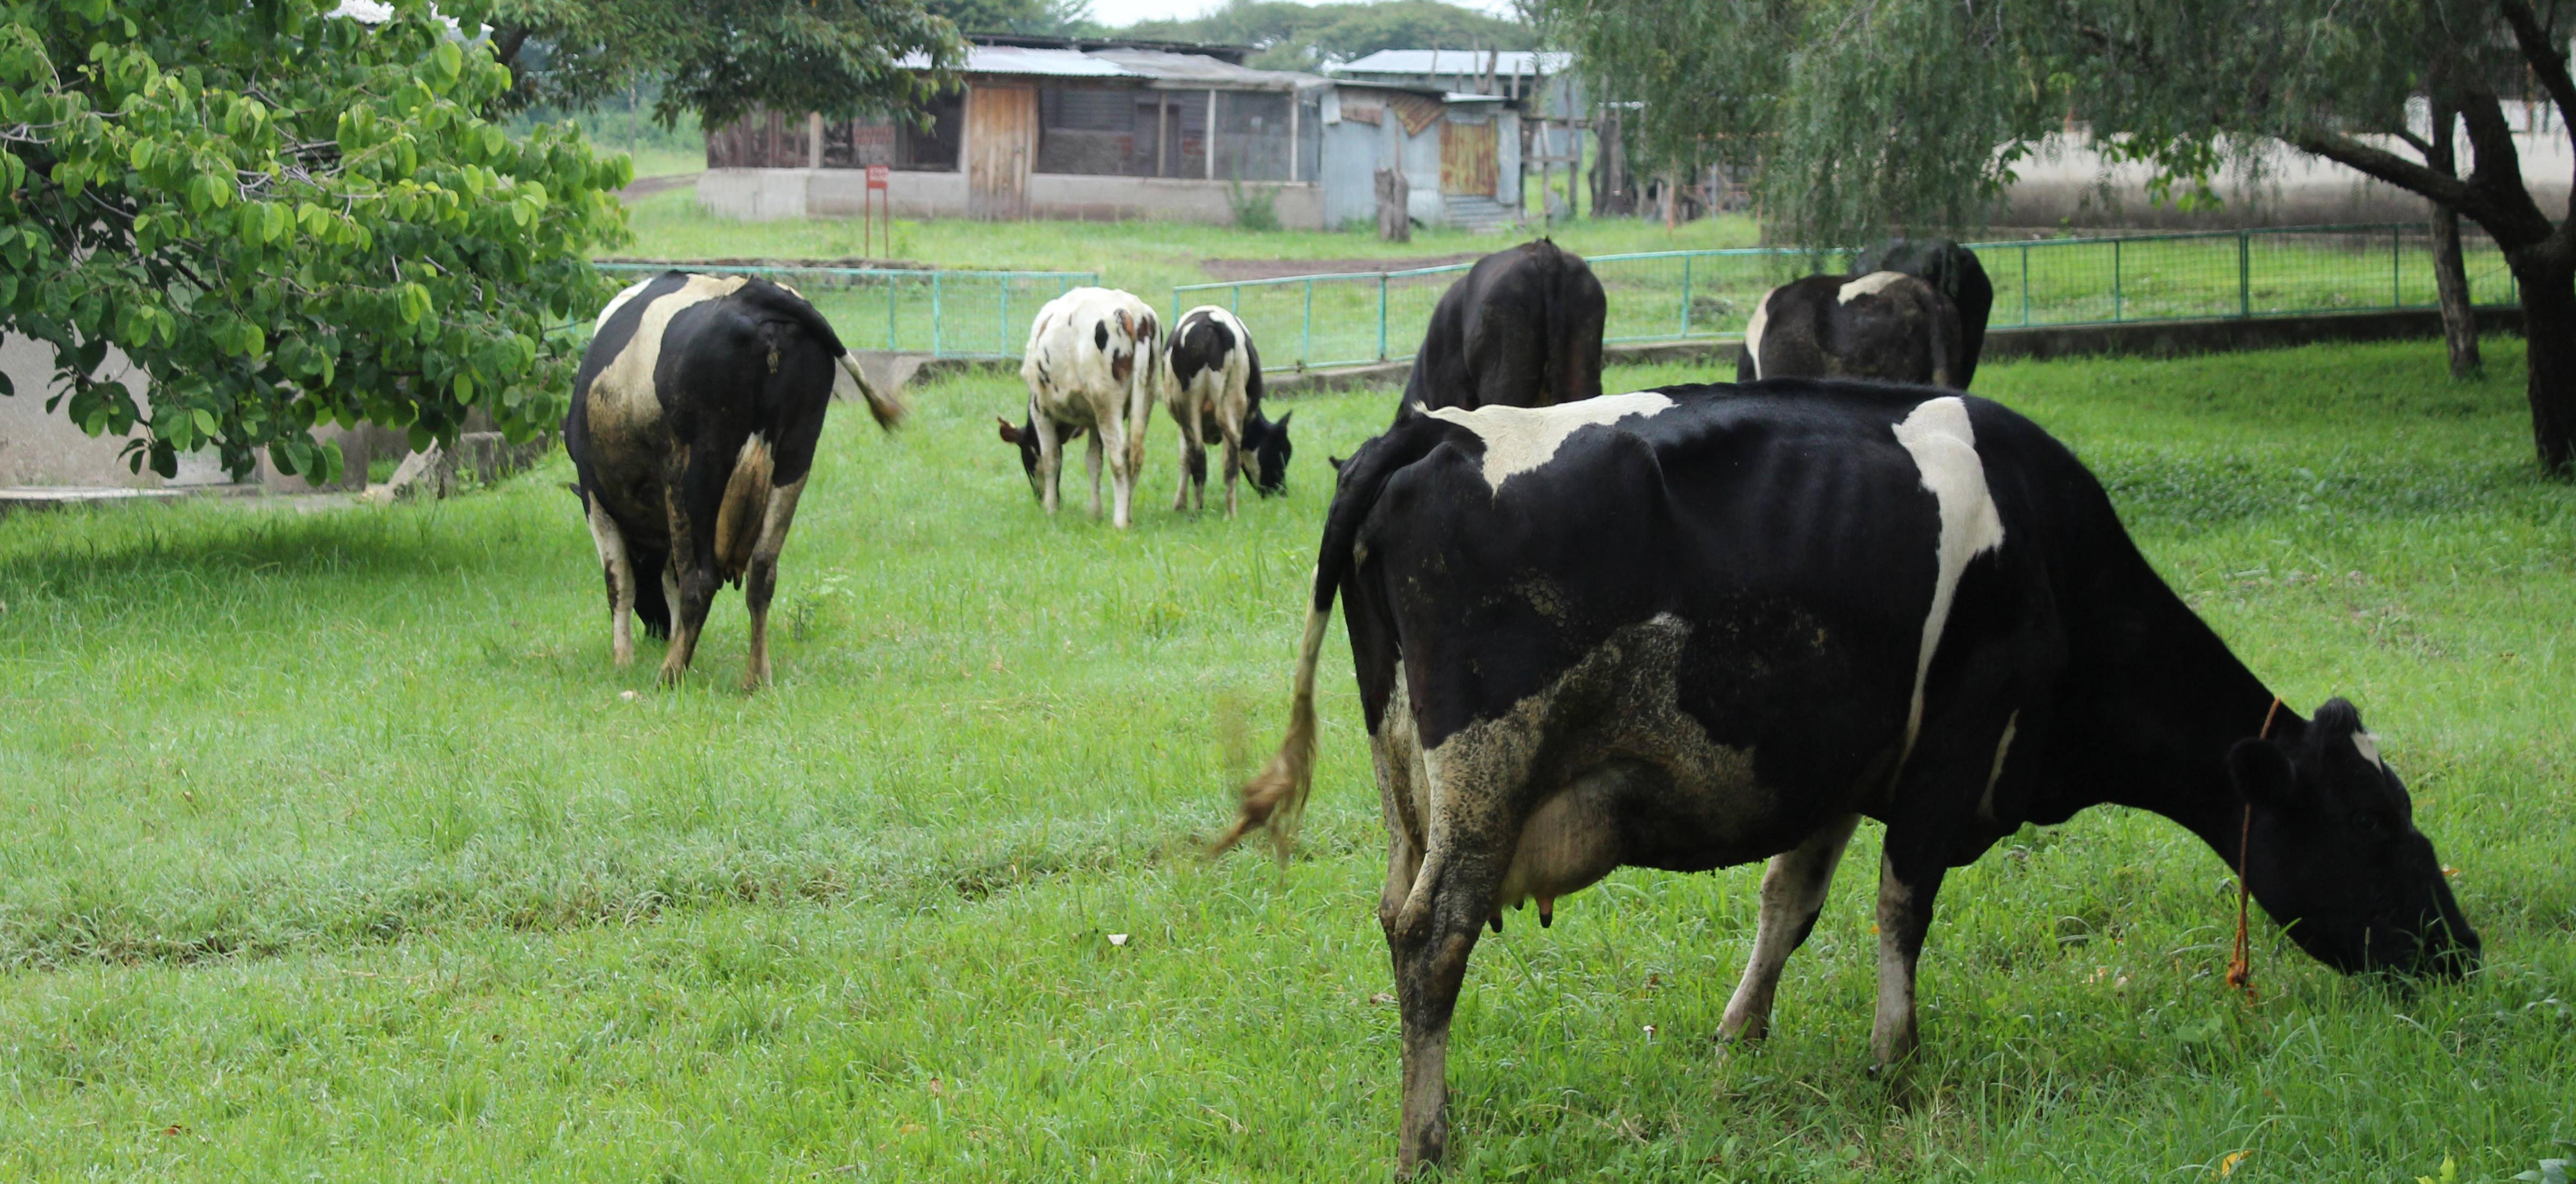 Black and white cows grazing outside a building in northern Tanzania